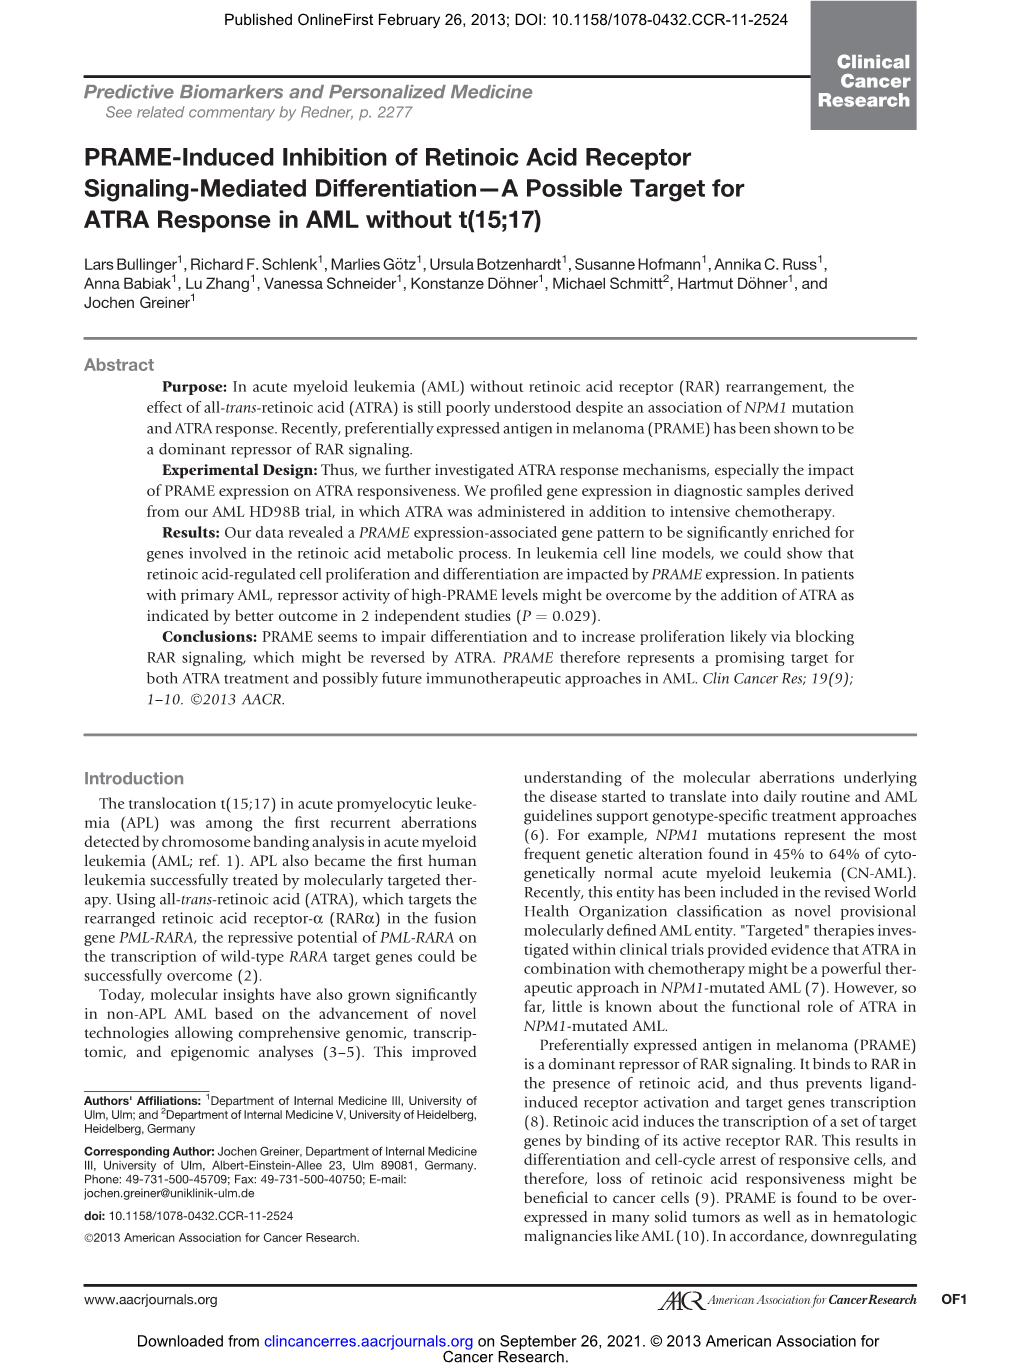 PRAME-Induced Inhibition of Retinoic Acid Receptor Signaling-Mediated Differentiation—A Possible Target for ATRA Response in AML Without T(15;17)